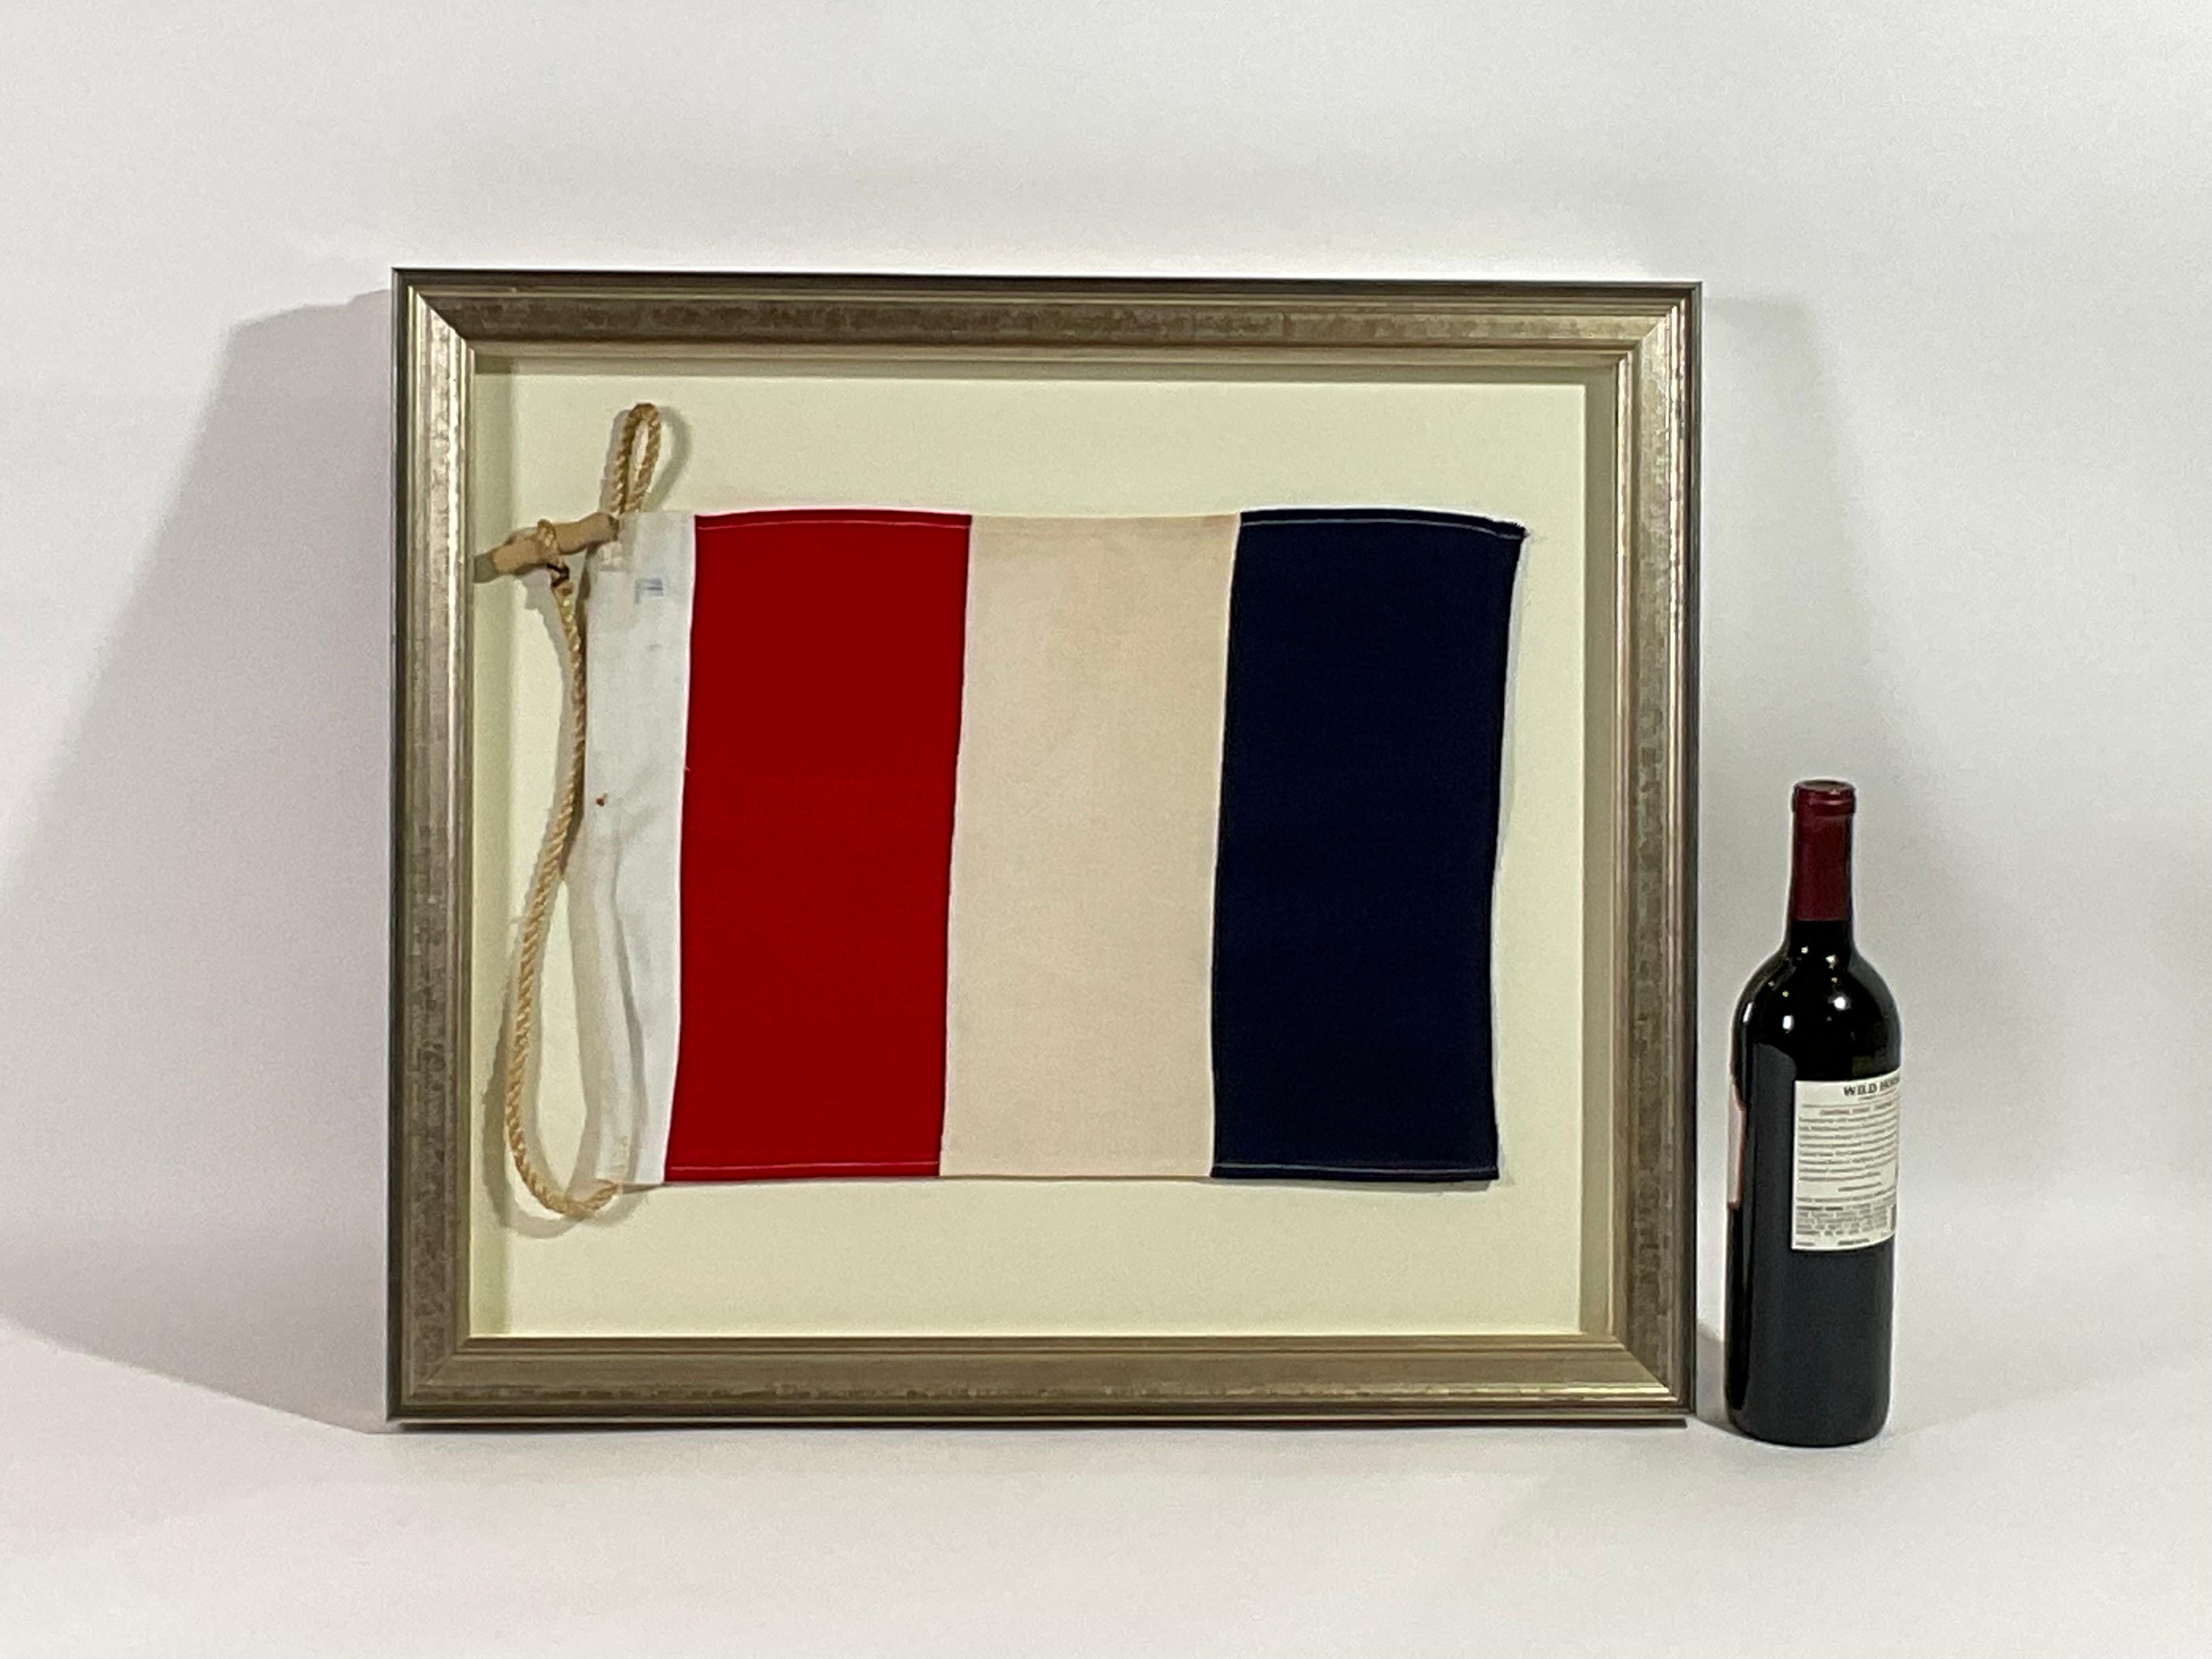 Framed maritime signal flag representing the letter “T” in the international code of signals.  This authentic pennant is made of individual panels of red, white and blue cotton. Fitted to a heavy canvas hoist band with original rope and toggle. This